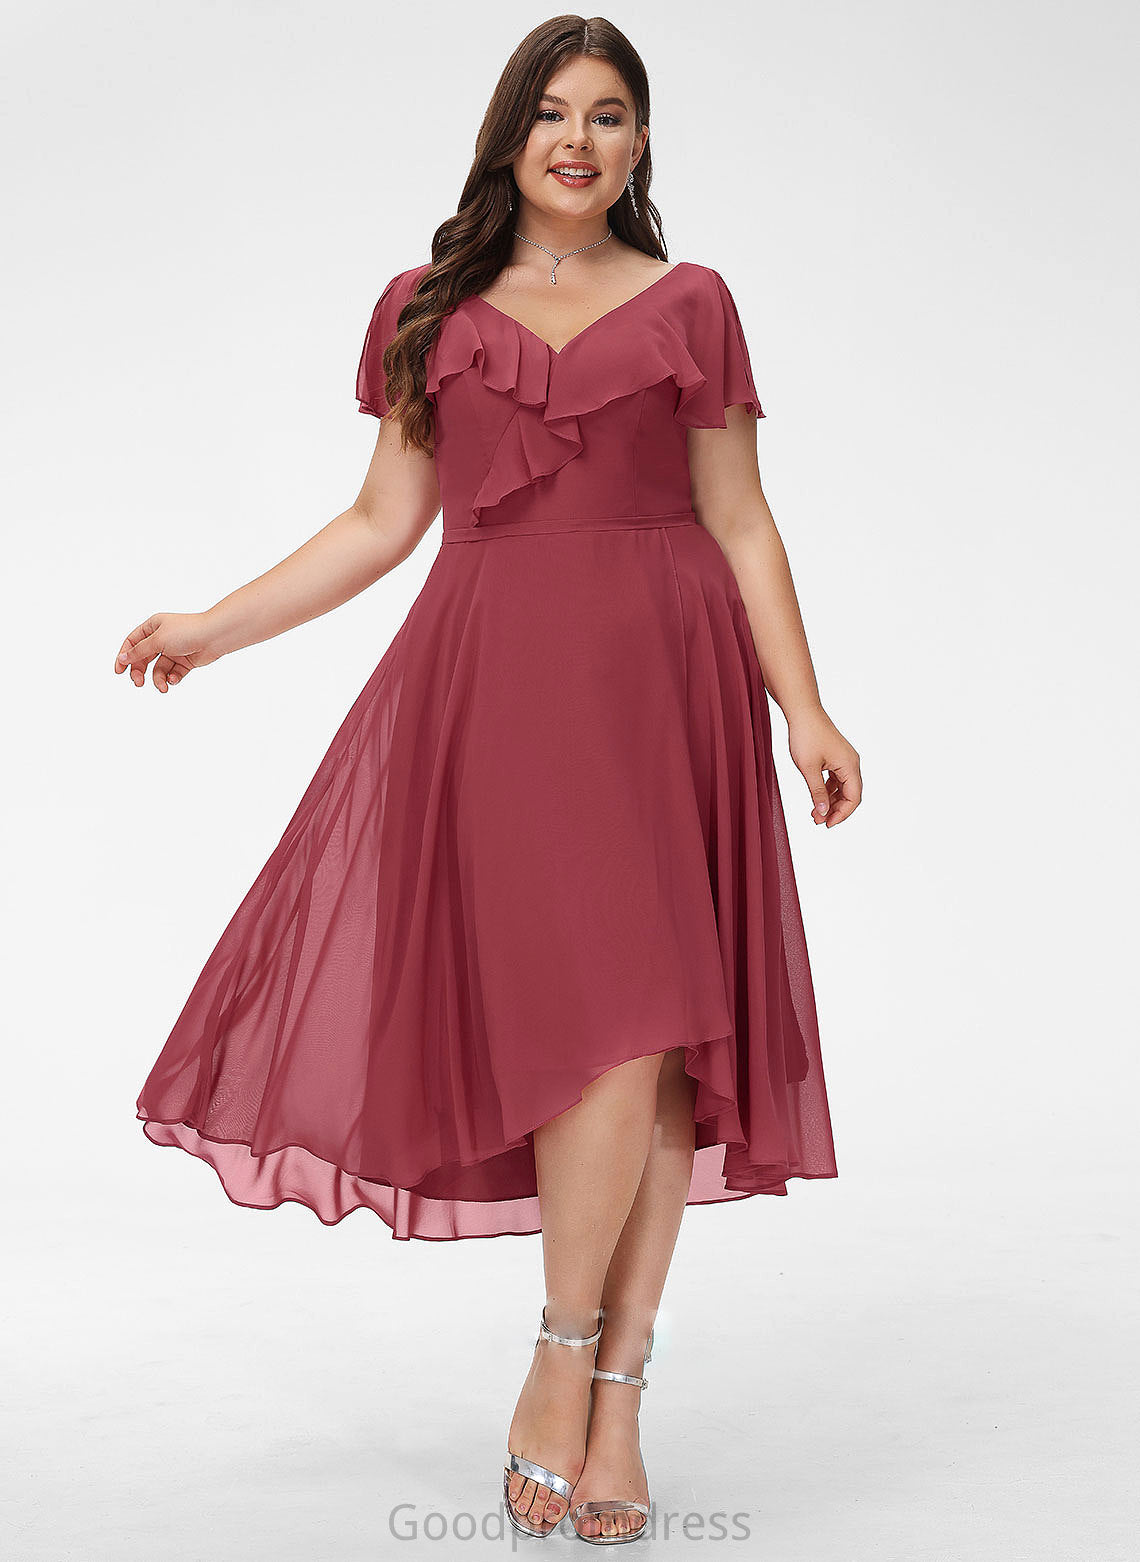 Ruffle Fabric Asymmetrical Silhouette Embellishment Length Neckline A-Line V-neck Camryn Tulle Off The Shoulder Bridesmaid Dresses